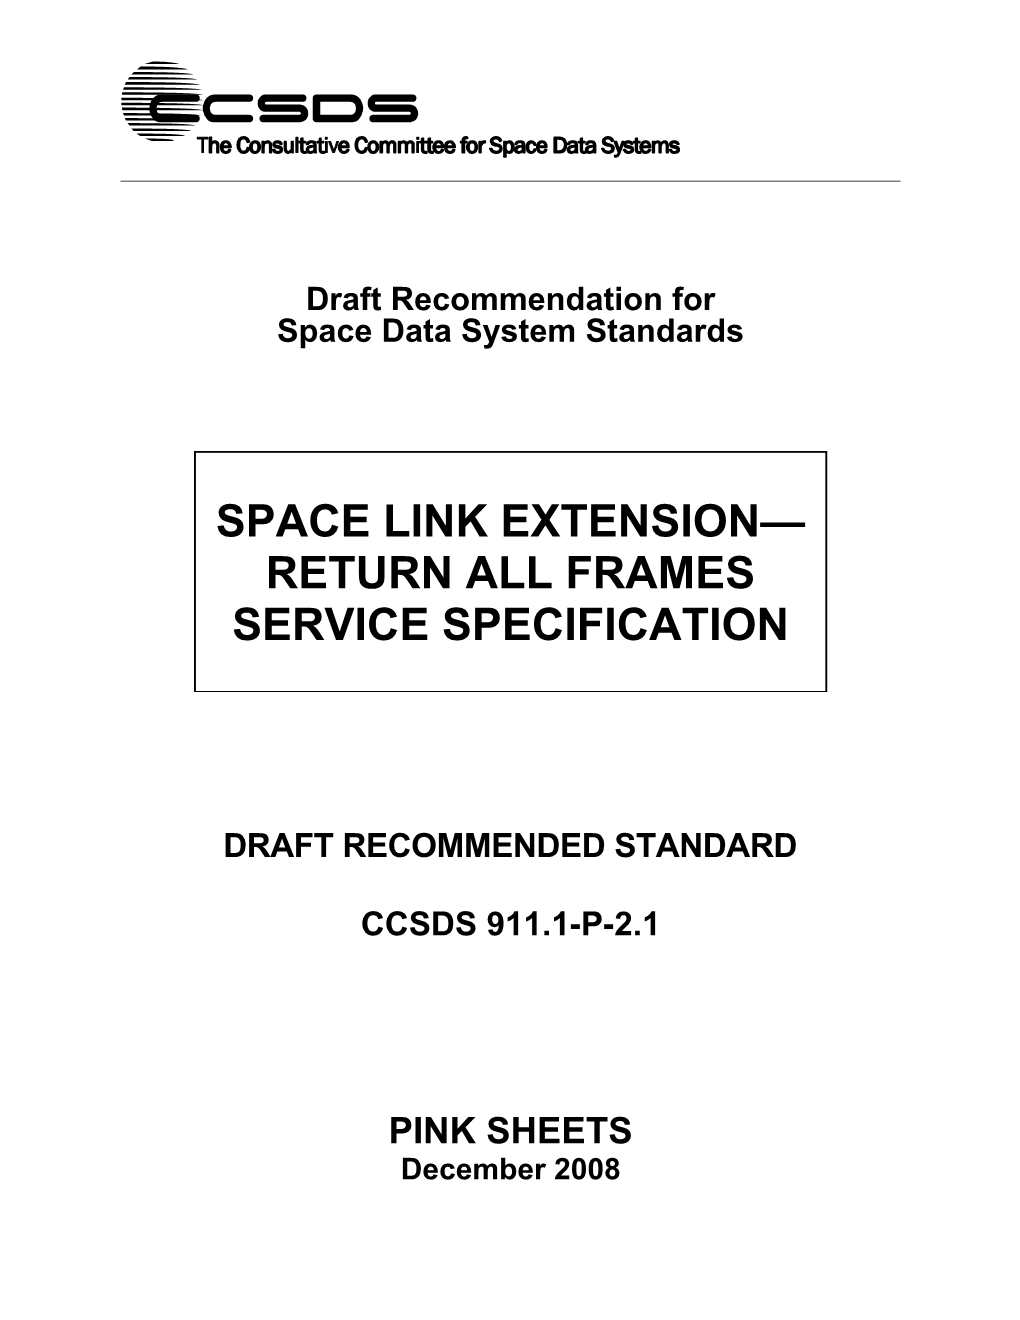 Space Link Extension Return All Frames Service Specification